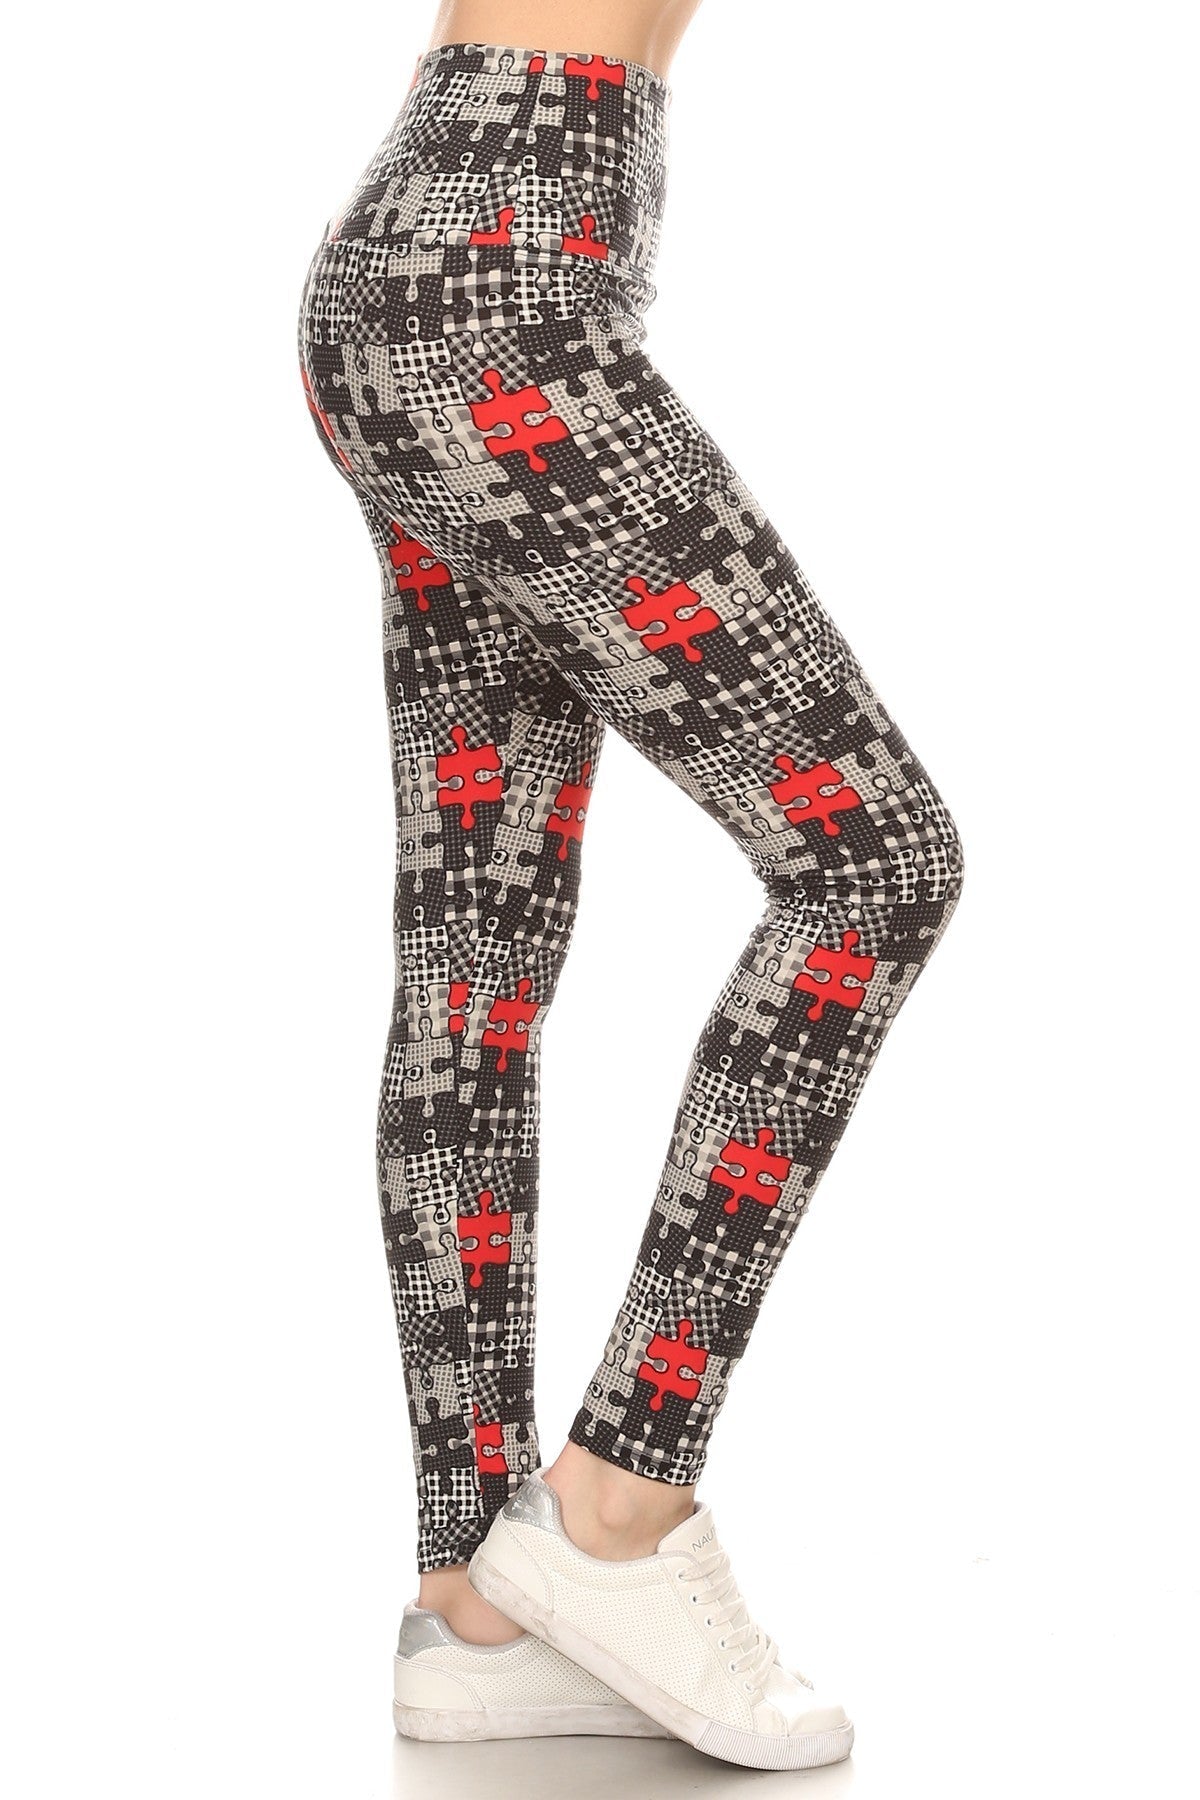 5-inch Long Yoga Style Banded Lined Puzzle Printed Knit Legging With High Waist Smile Sparker